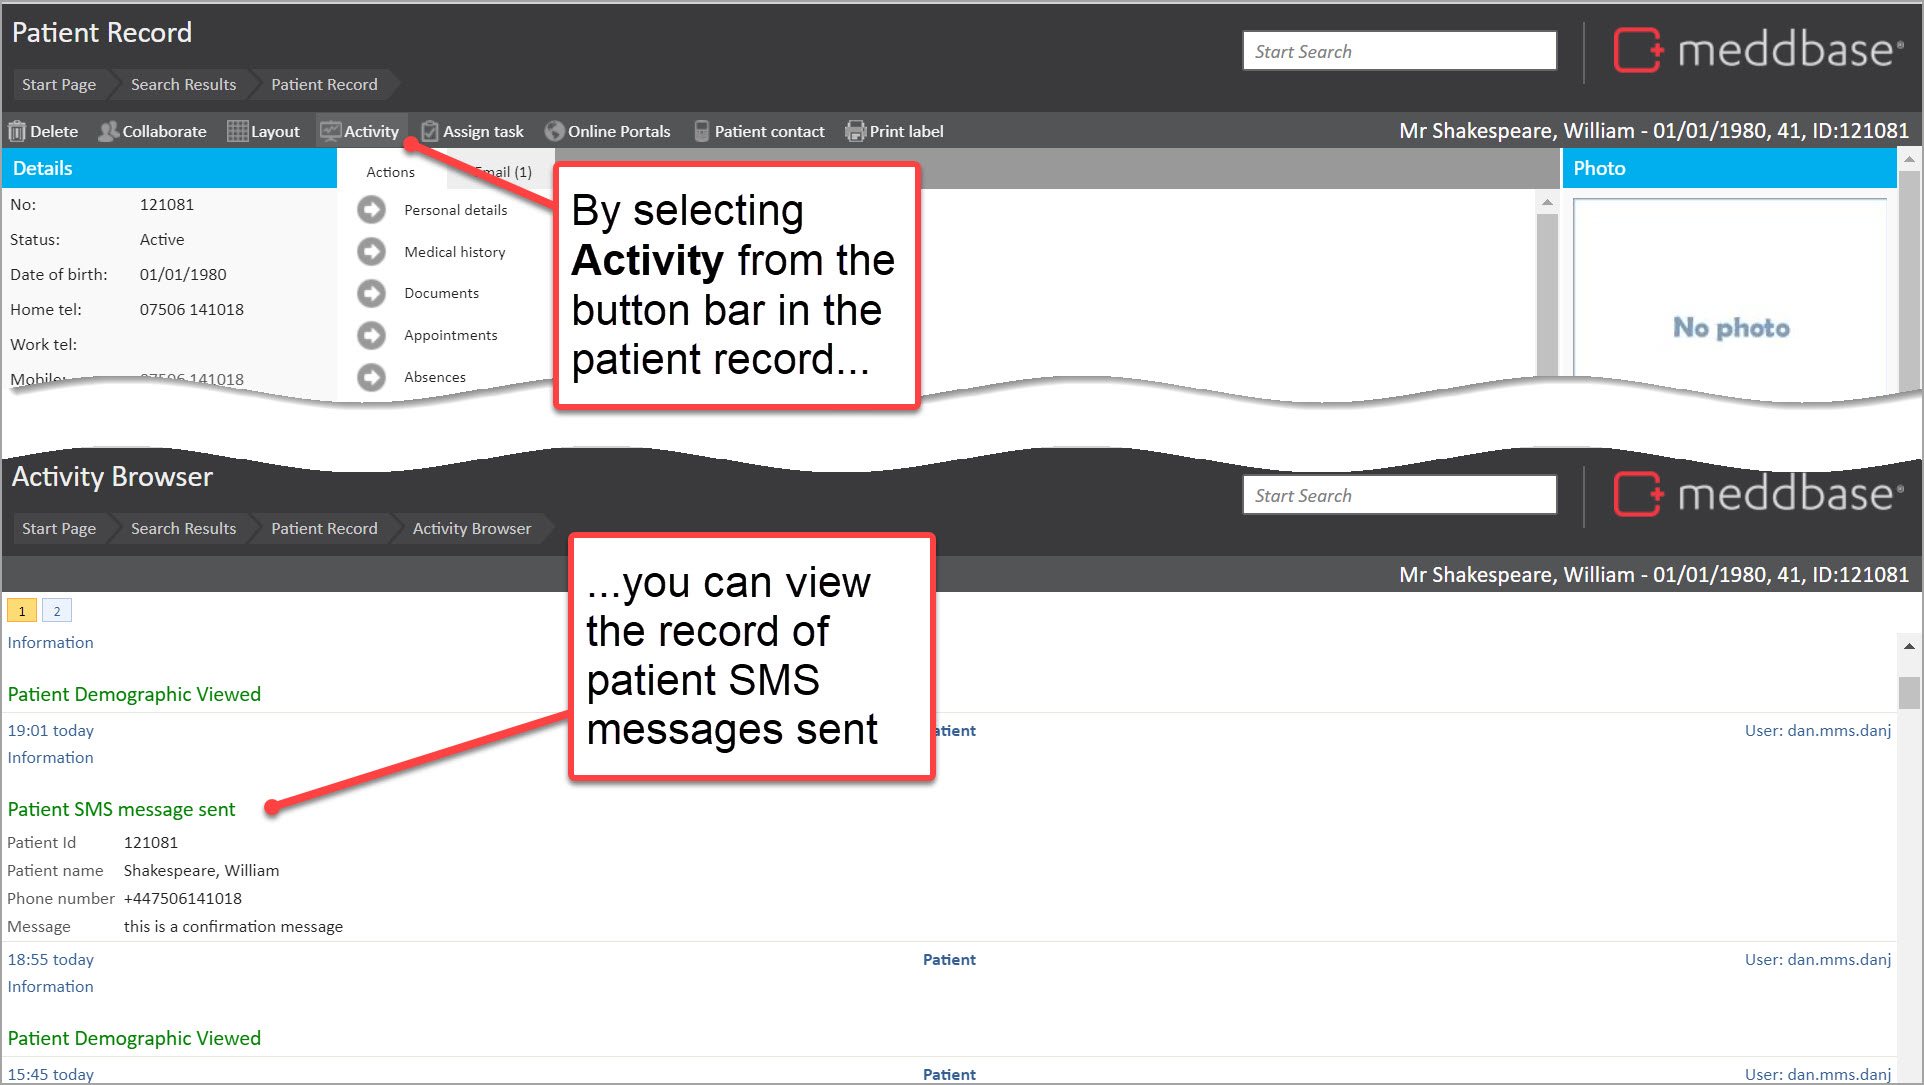 2f_-_Record_of_patient_SMS_message_sent_in_Activity_Browser.jpg